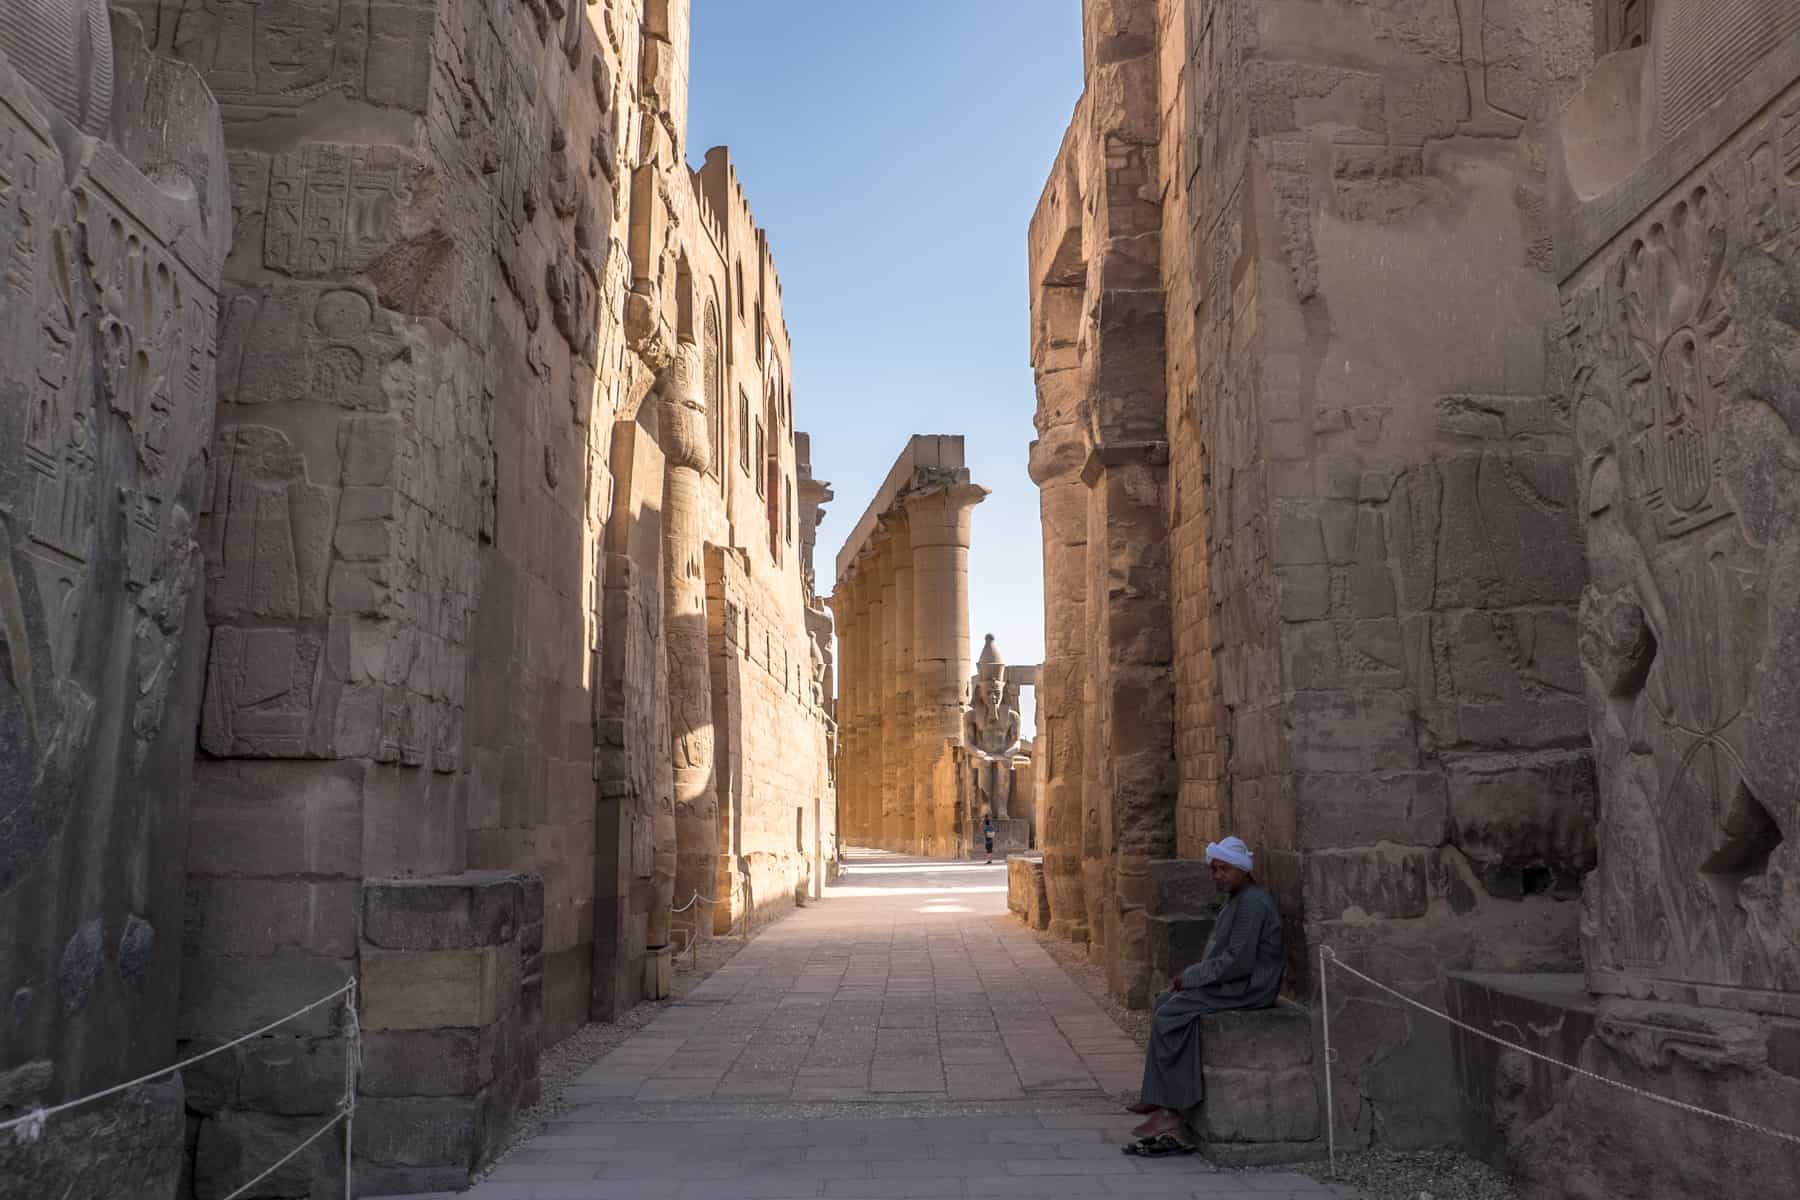 An Egyptian temple guard sits within a stone wall corridor filled with sunlight at the Karnak Temple complex - one of the best places to visit in Egypt